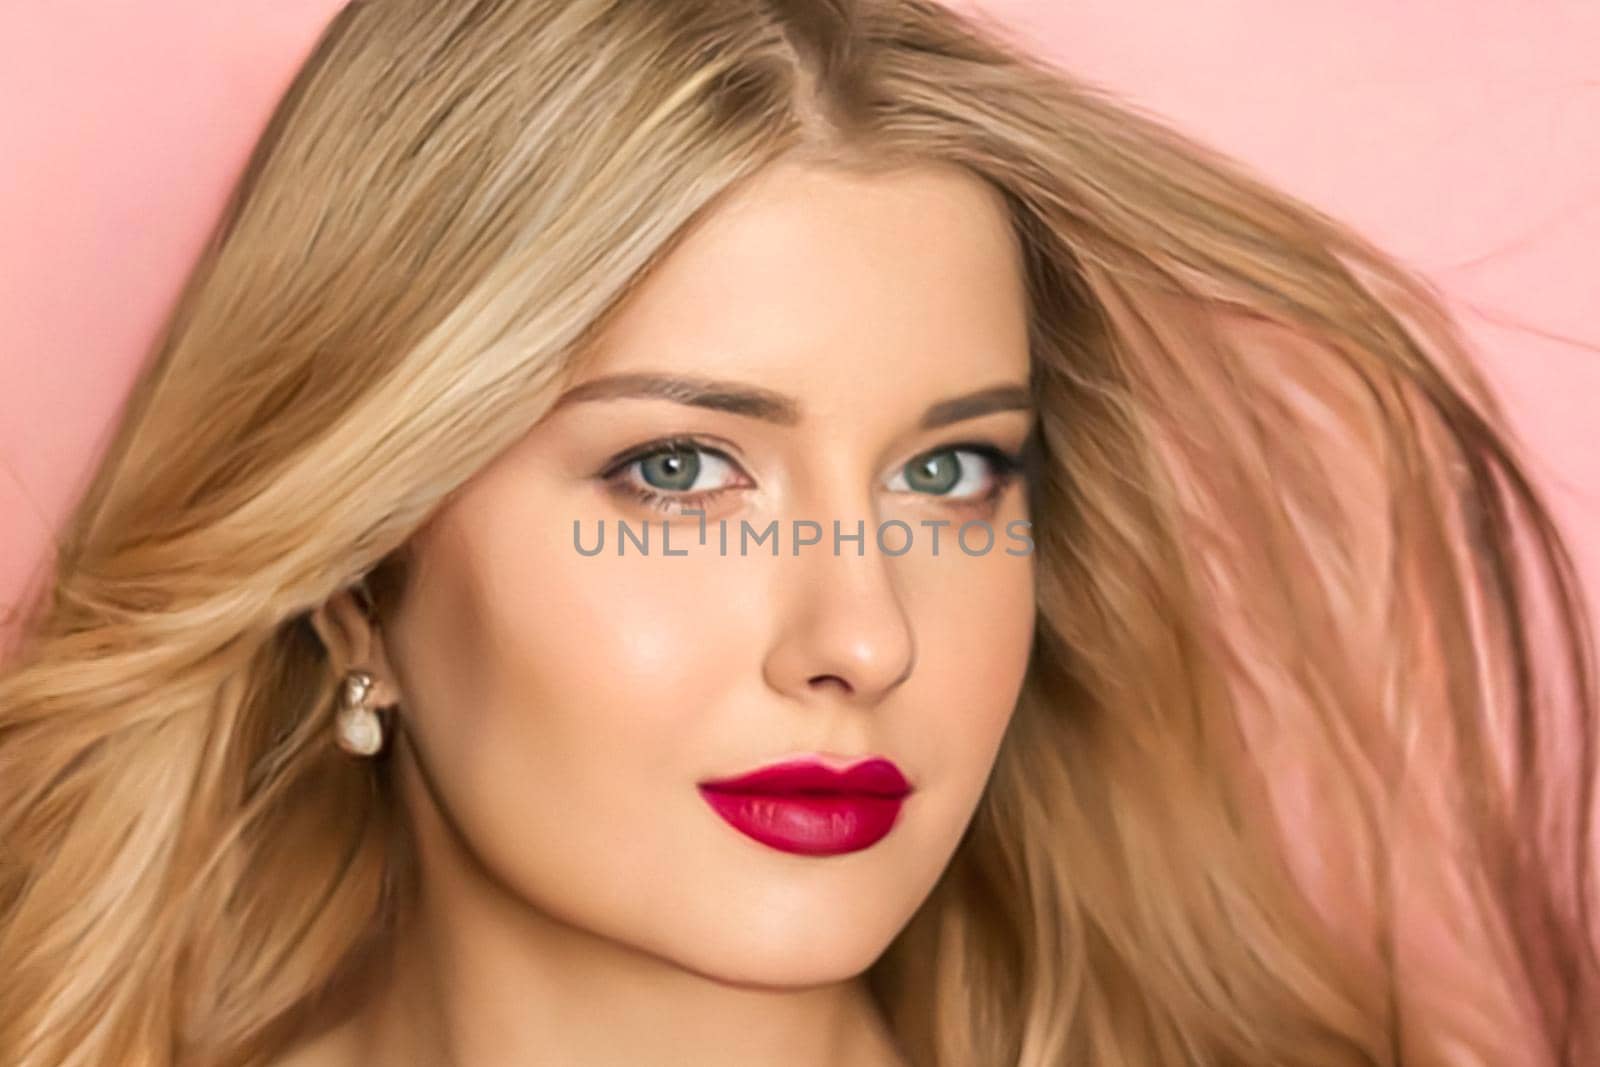 Beauty, makeup and hairstyle, beautiful blonde woman with red matte lipstick make up on pink background as bridal make-up look, fashion and glamour model face portrait for cosmetics, skincare and hair care brand